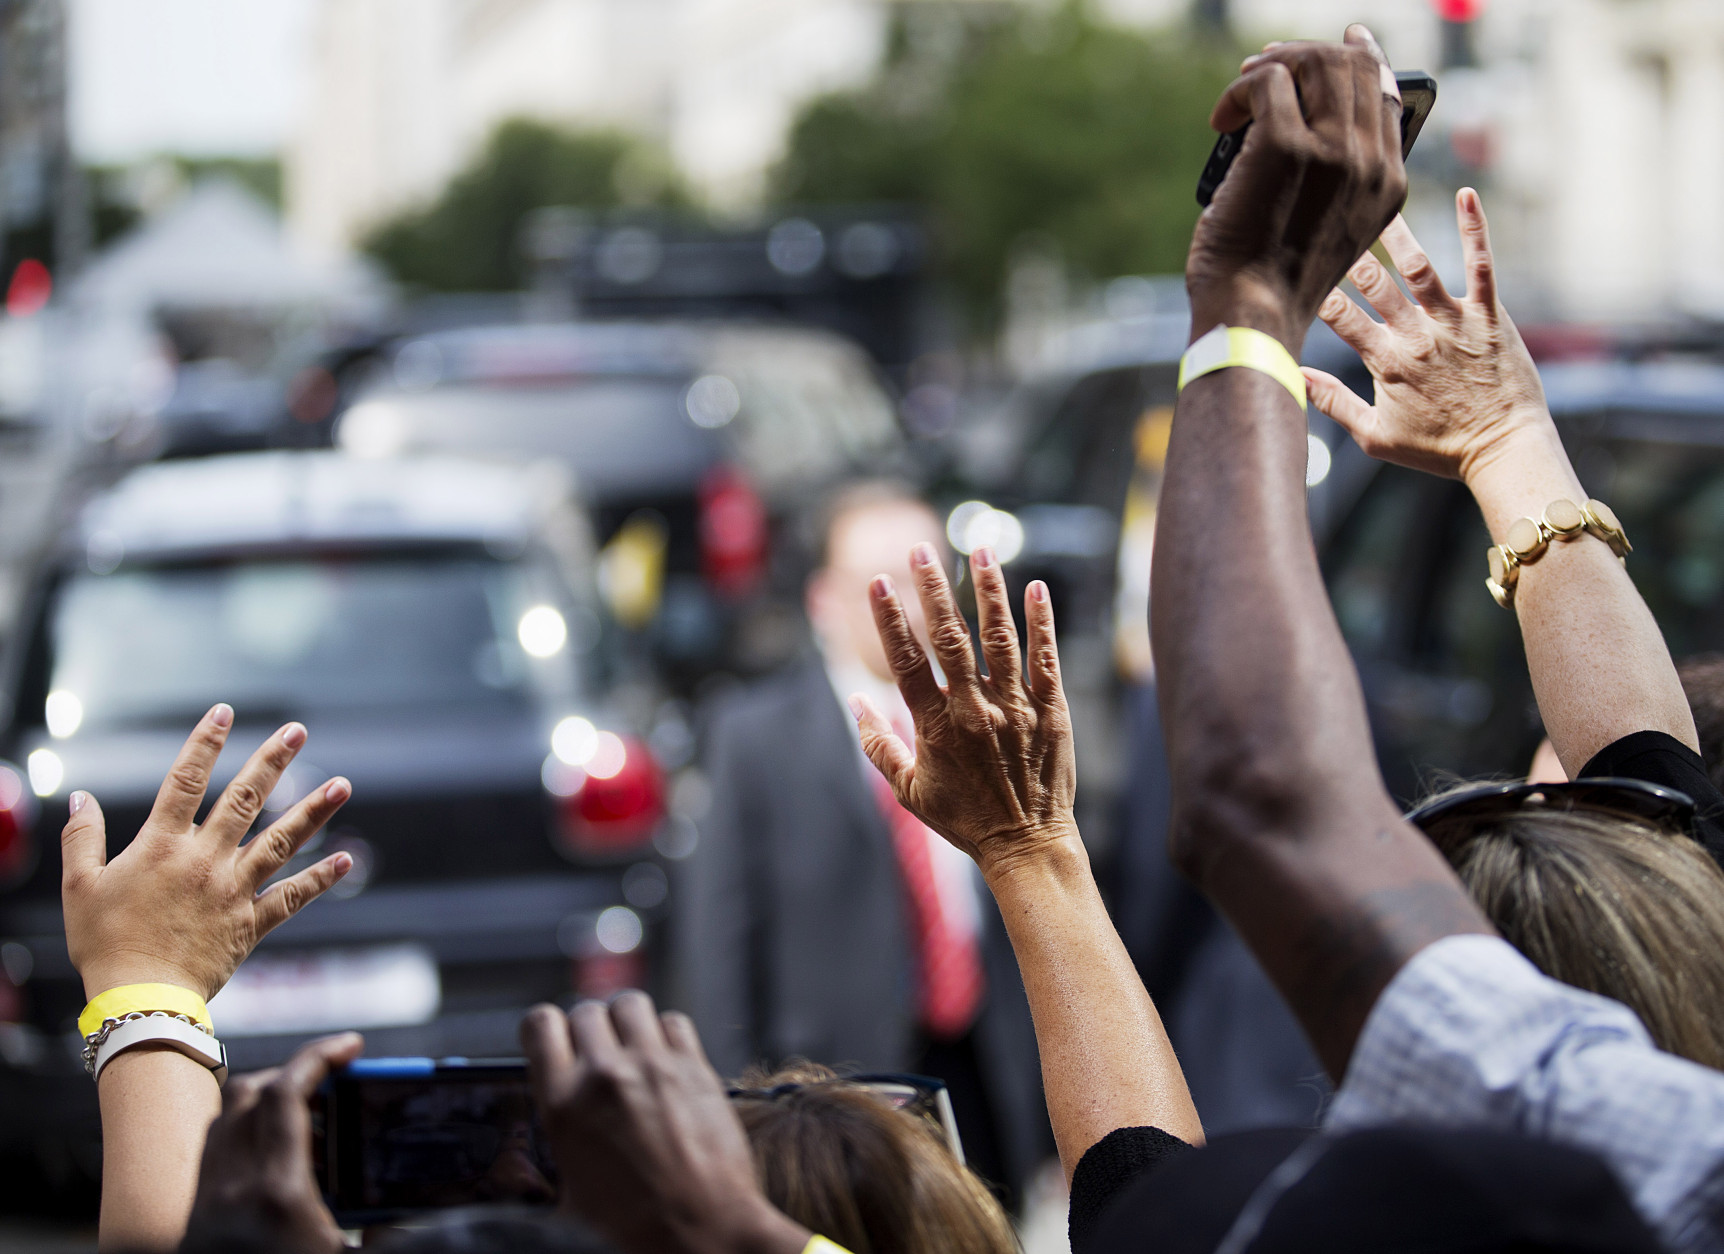 WASHINGTON, DC - SEPTEMBER 24: People wave as Pope Francis leaves in his Fiat after a visit to Catholic Charities of the Archdiocese of Washington September 24, 2015 in Washington, DC. Pope Francis is in the United States for six days during his first trip as the leader of the Catholic Church. (Photo by David Goldman-Pool/Getty Images)